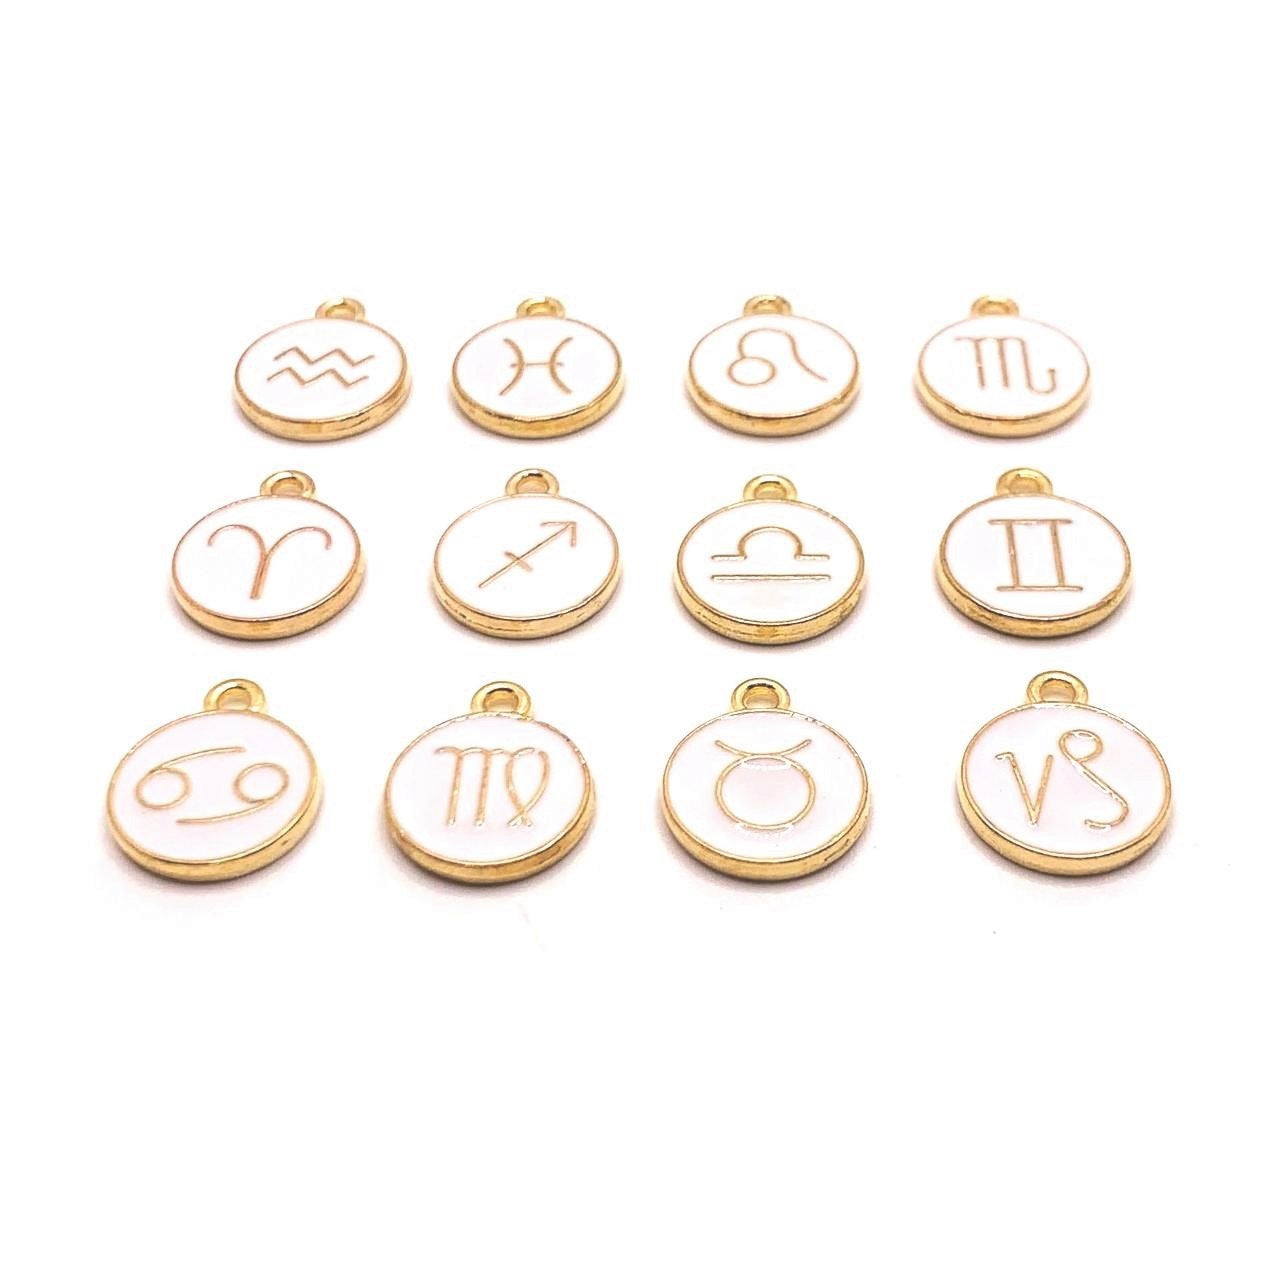 12 or 60 Pieces: White Enamel and Gold Zodiac/Astrology Charms, Double Sided